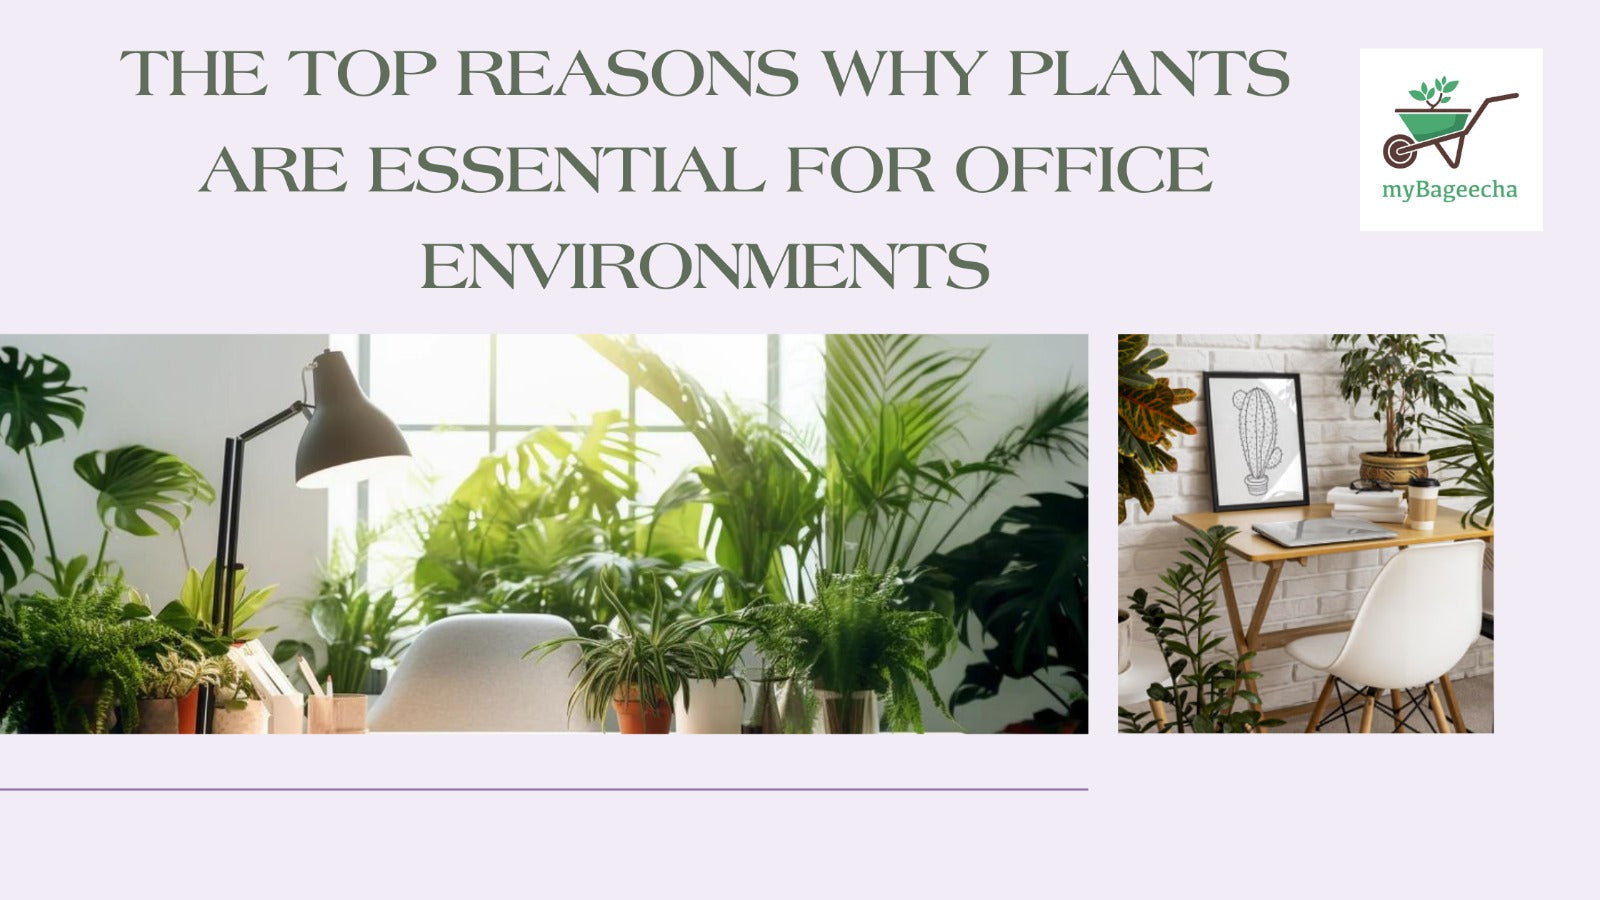 The Top Reasons Why Plants Are Essential for Office Environments